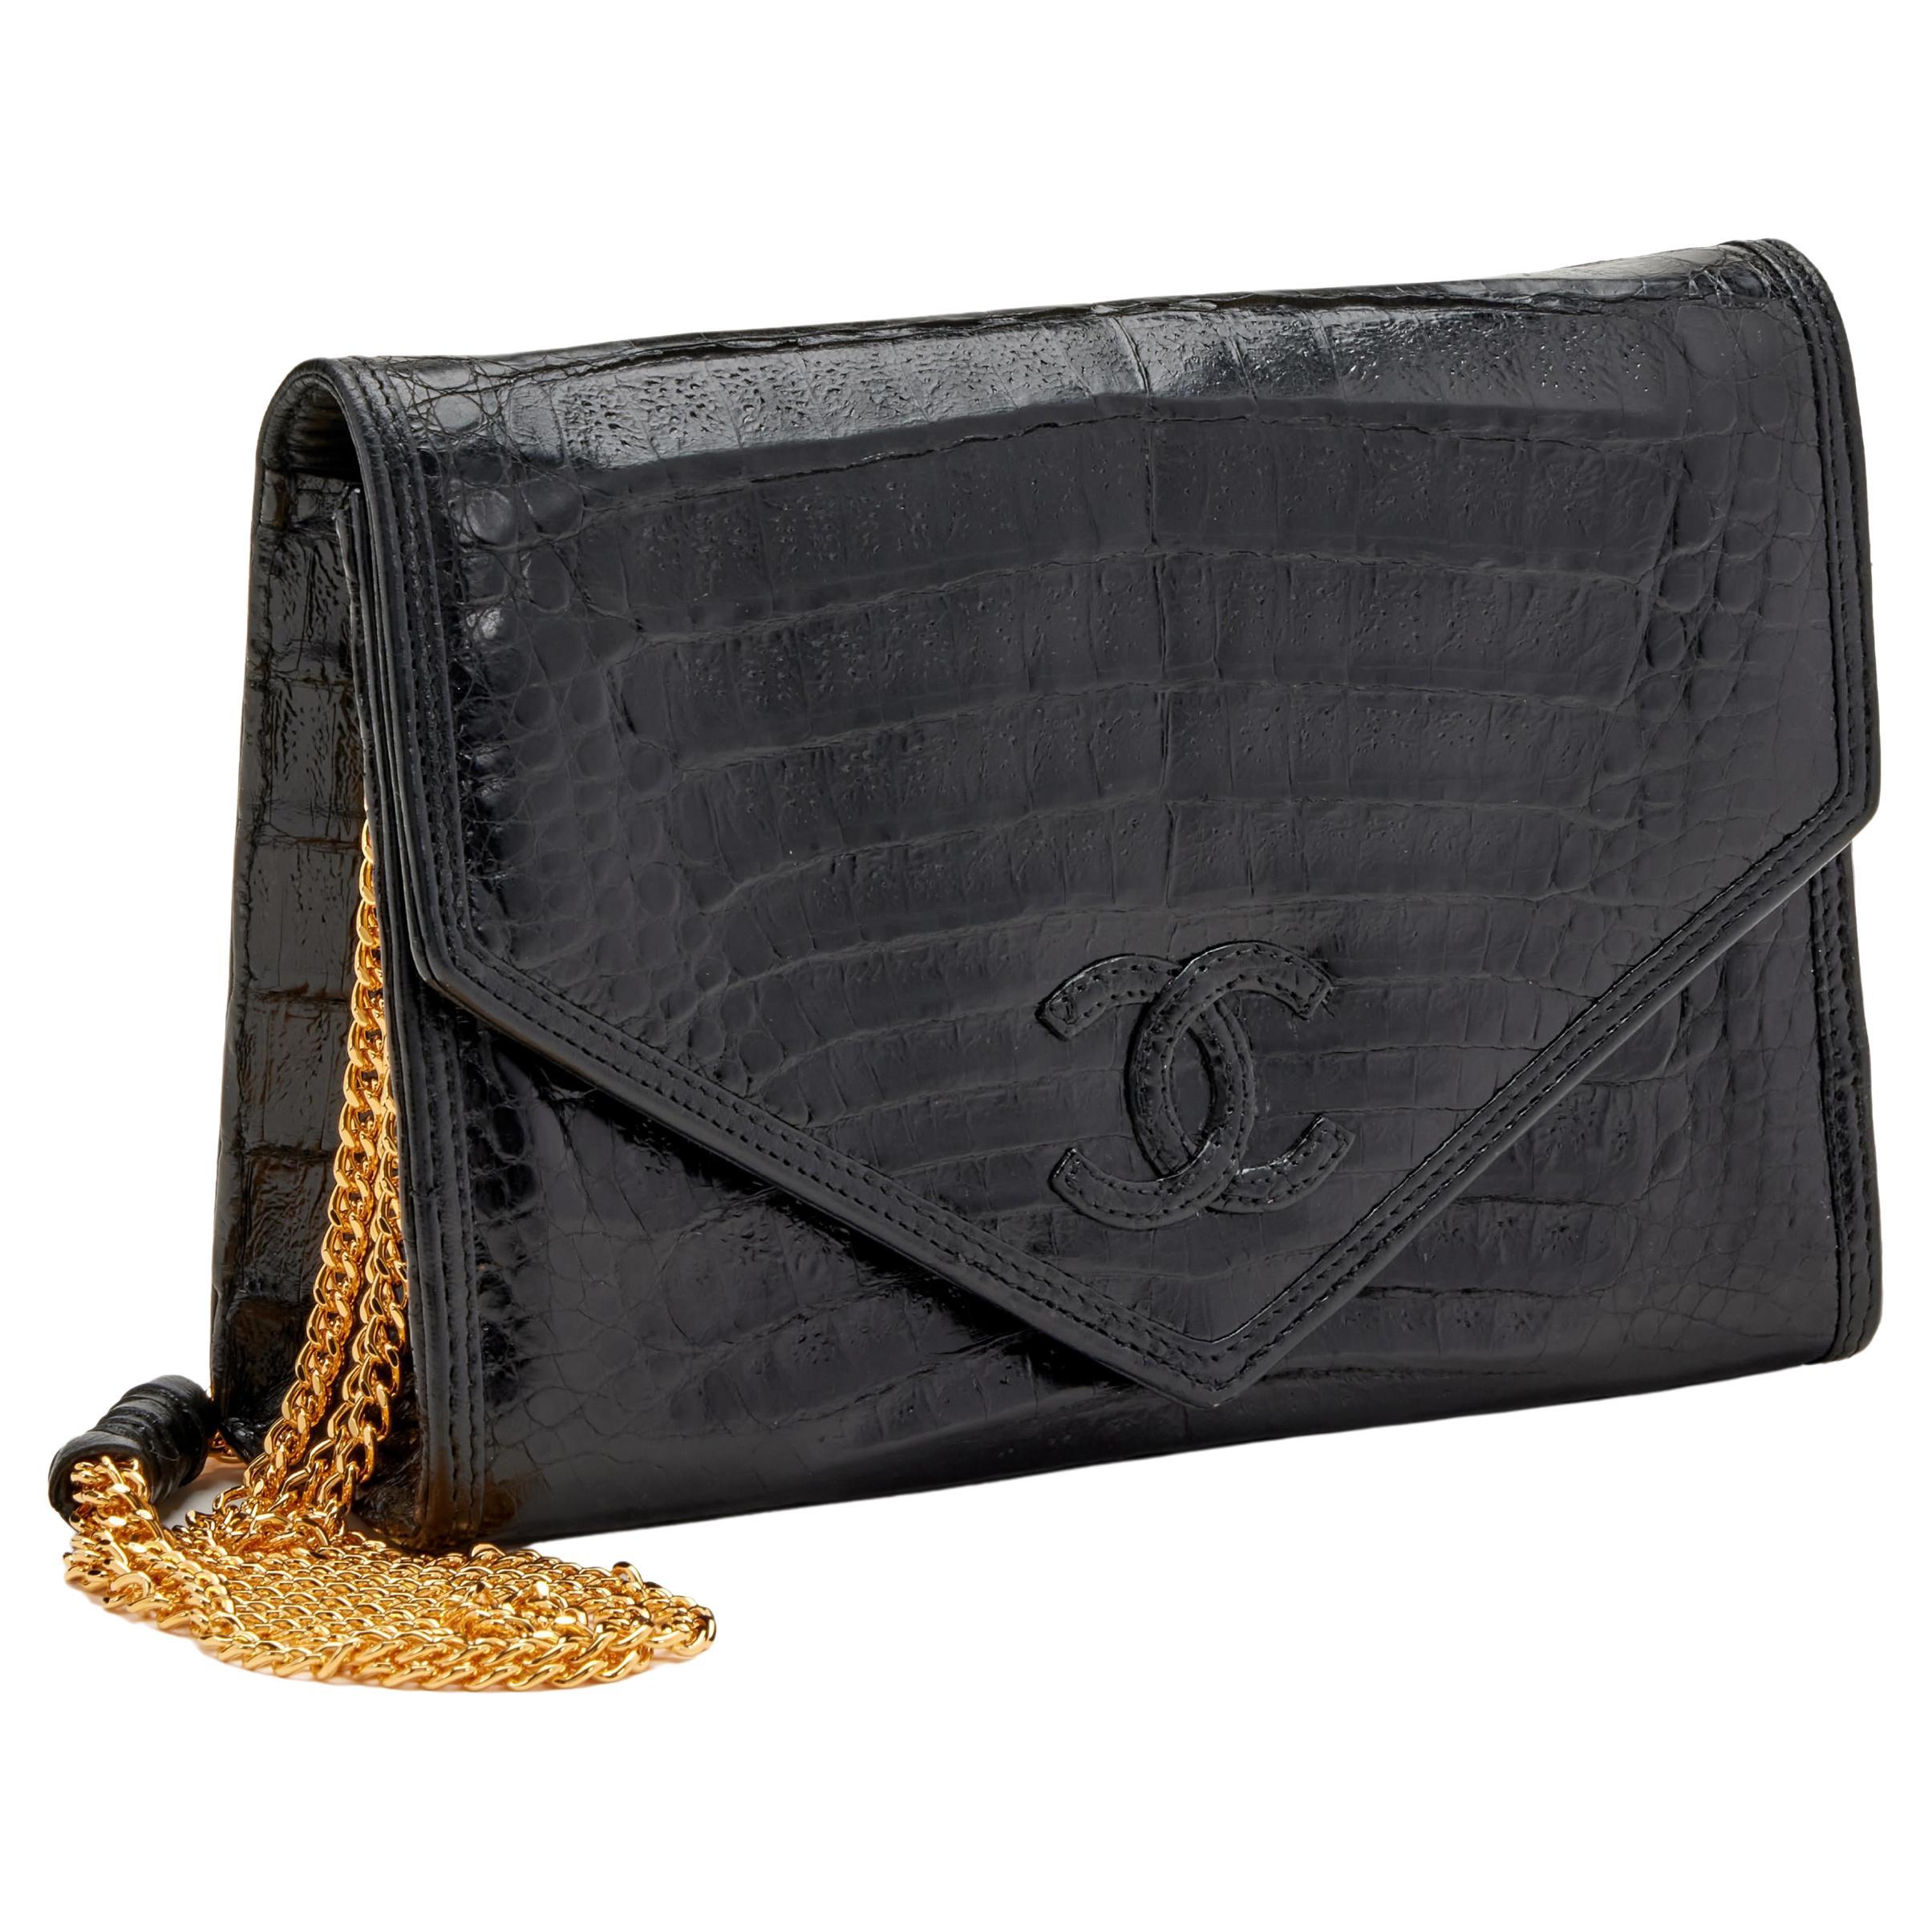 CHANEL CC Envelope Printed Leather Chain Clutch Bag Black